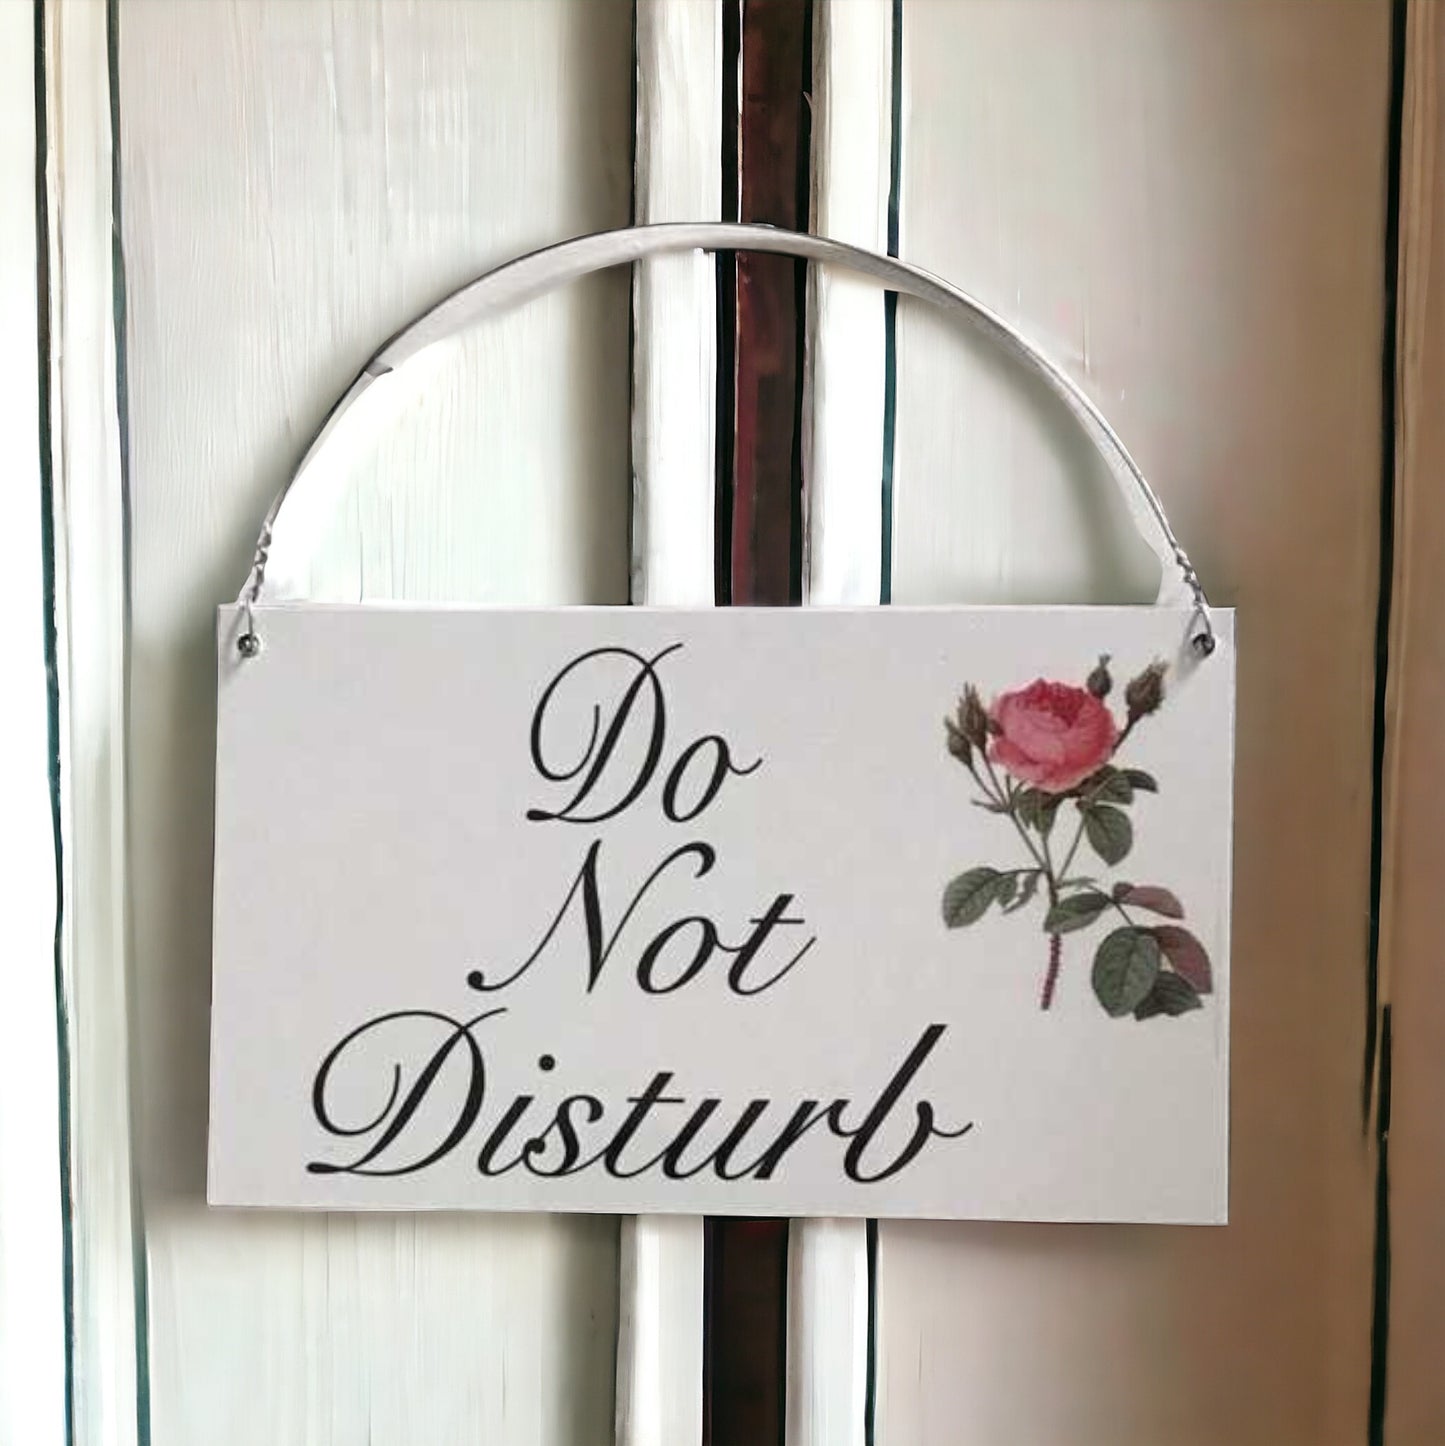 Do Not Disturb Make Up My Room Double Sided Rose Sign - The Renmy Store Homewares & Gifts 